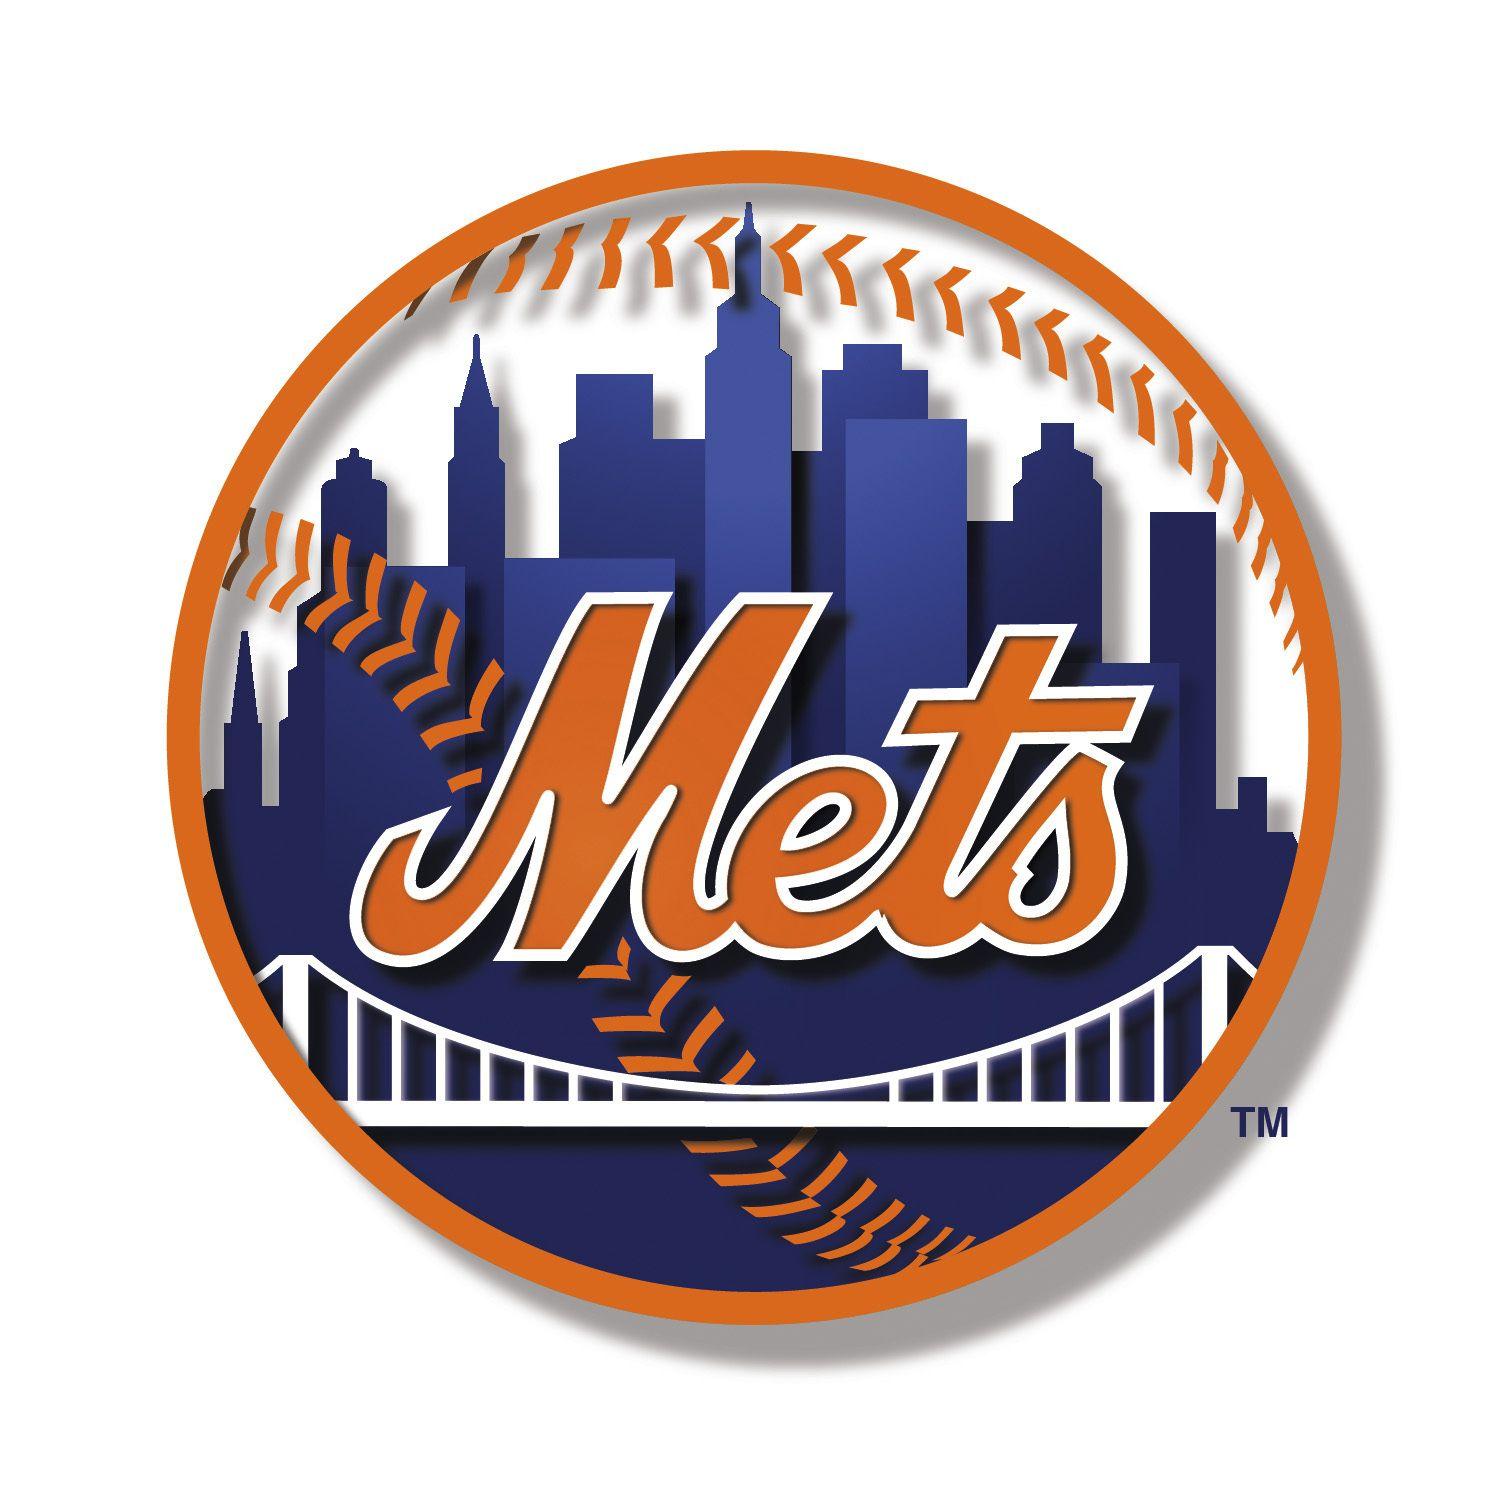 New York Mets image mets logo HD wallpaper and background photo